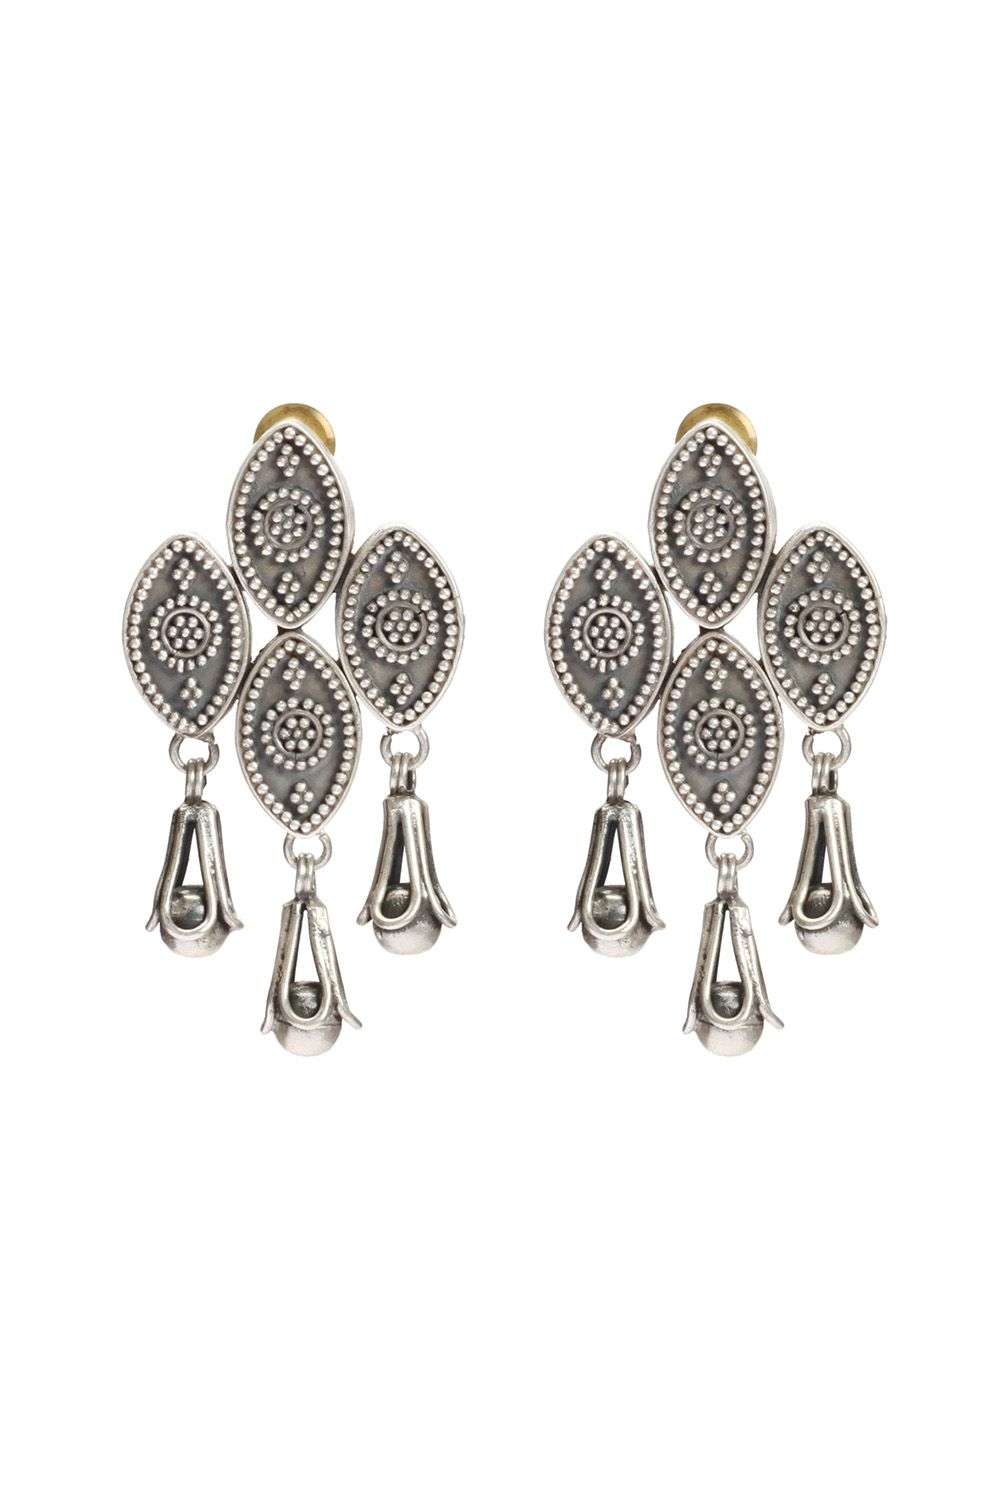 Elegant Handcrafted Sterling Silver Tribal Earrings | 925 Silver Collection  – Ritsika.in